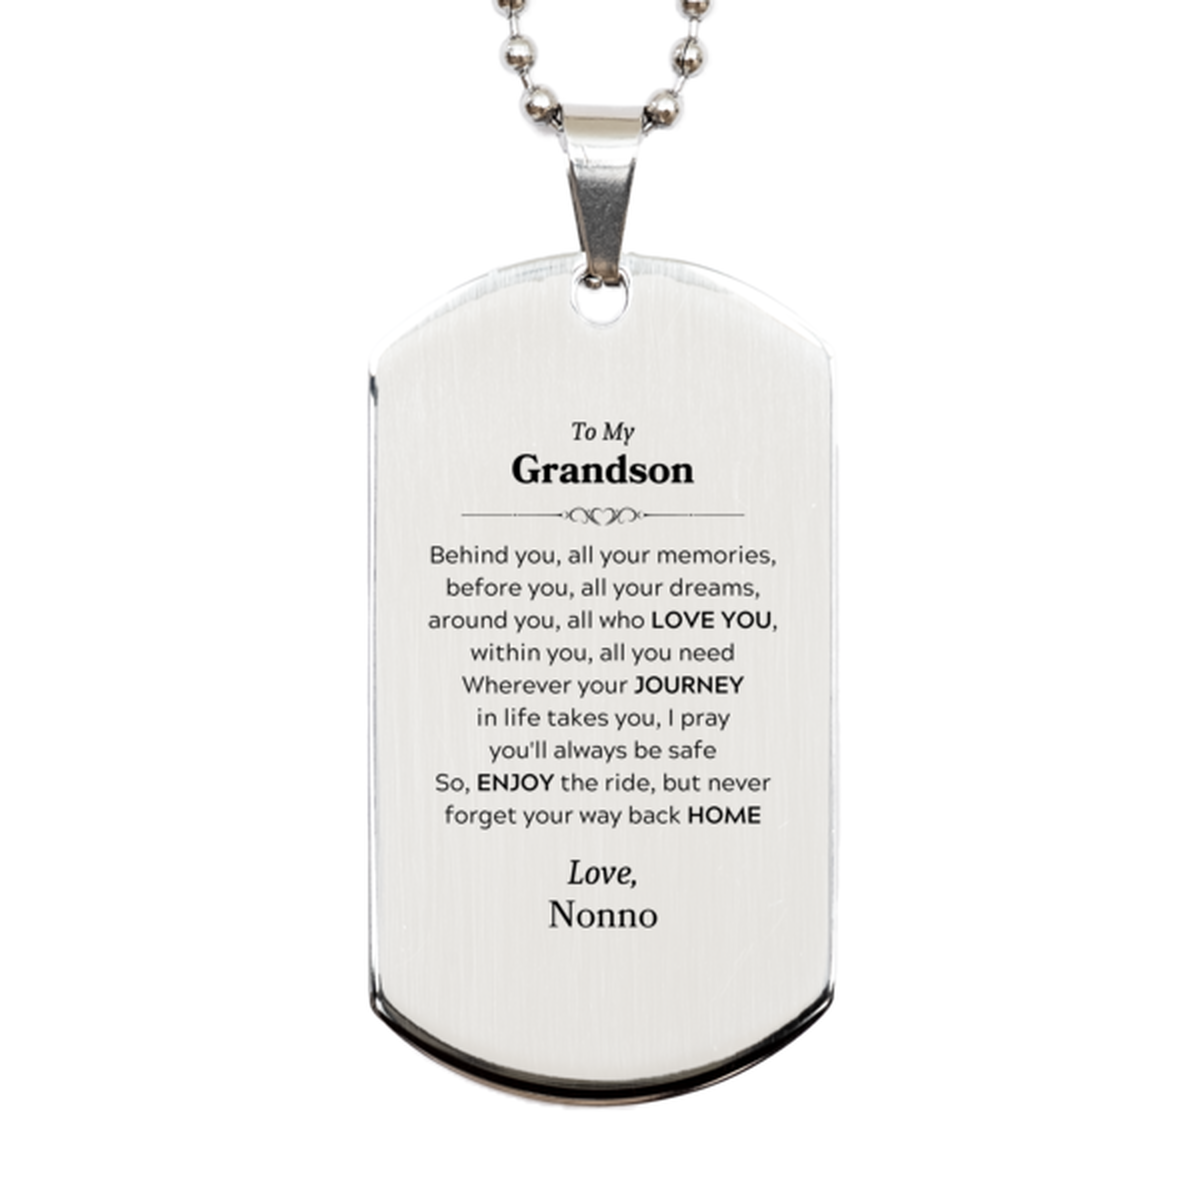 To My Grandson Graduation Gifts from Nonno, Grandson Silver Dog Tag Christmas Birthday Gifts for Grandson Behind you, all your memories, before you, all your dreams. Love, Nonno